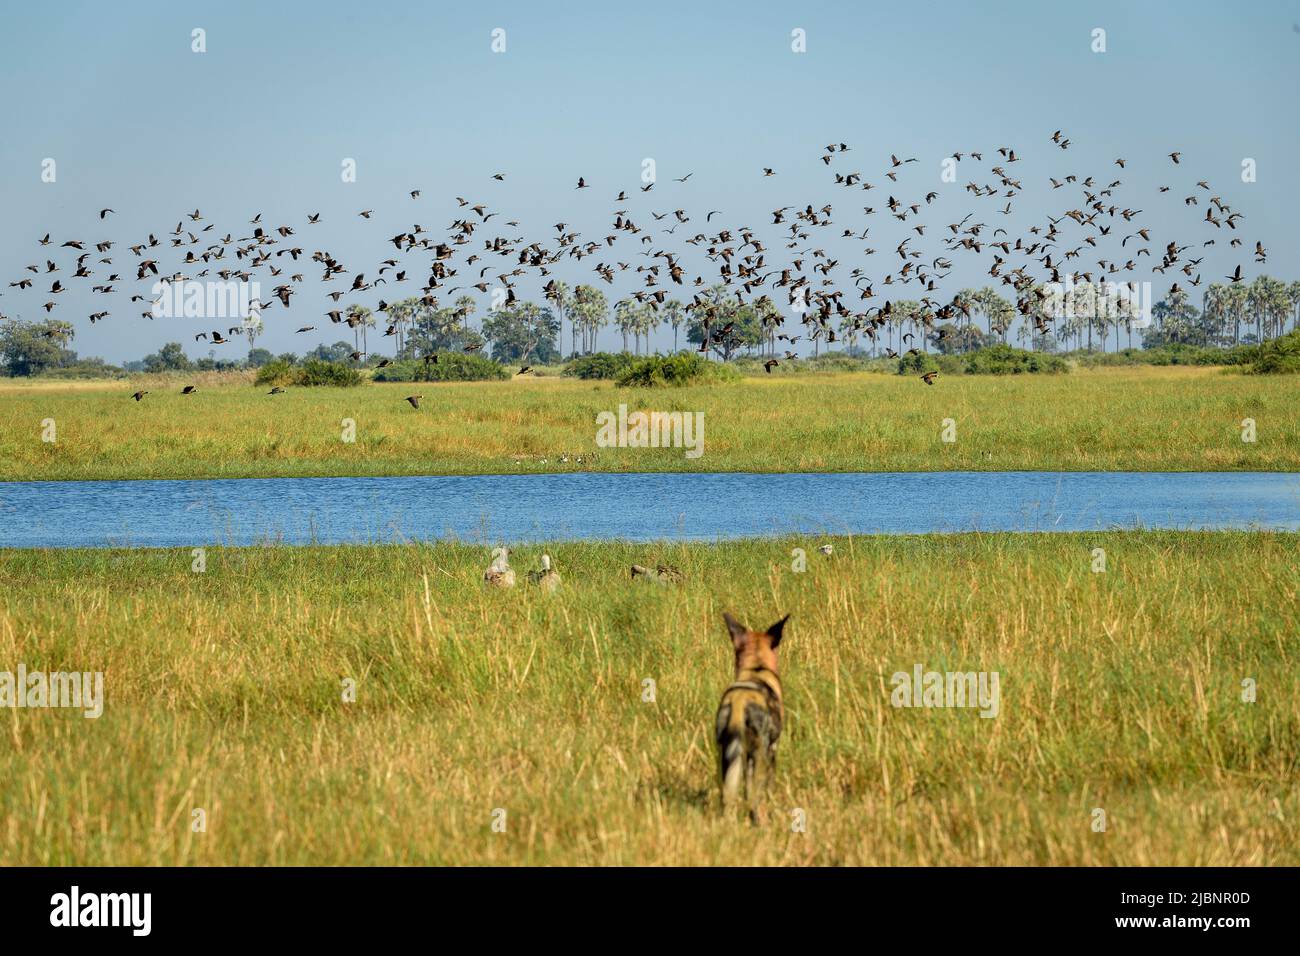 African Wild Dogs (Lycaon pictus) staring over water at flying White faced whistling ducks (Dendrocygna viduata) Stock Photo